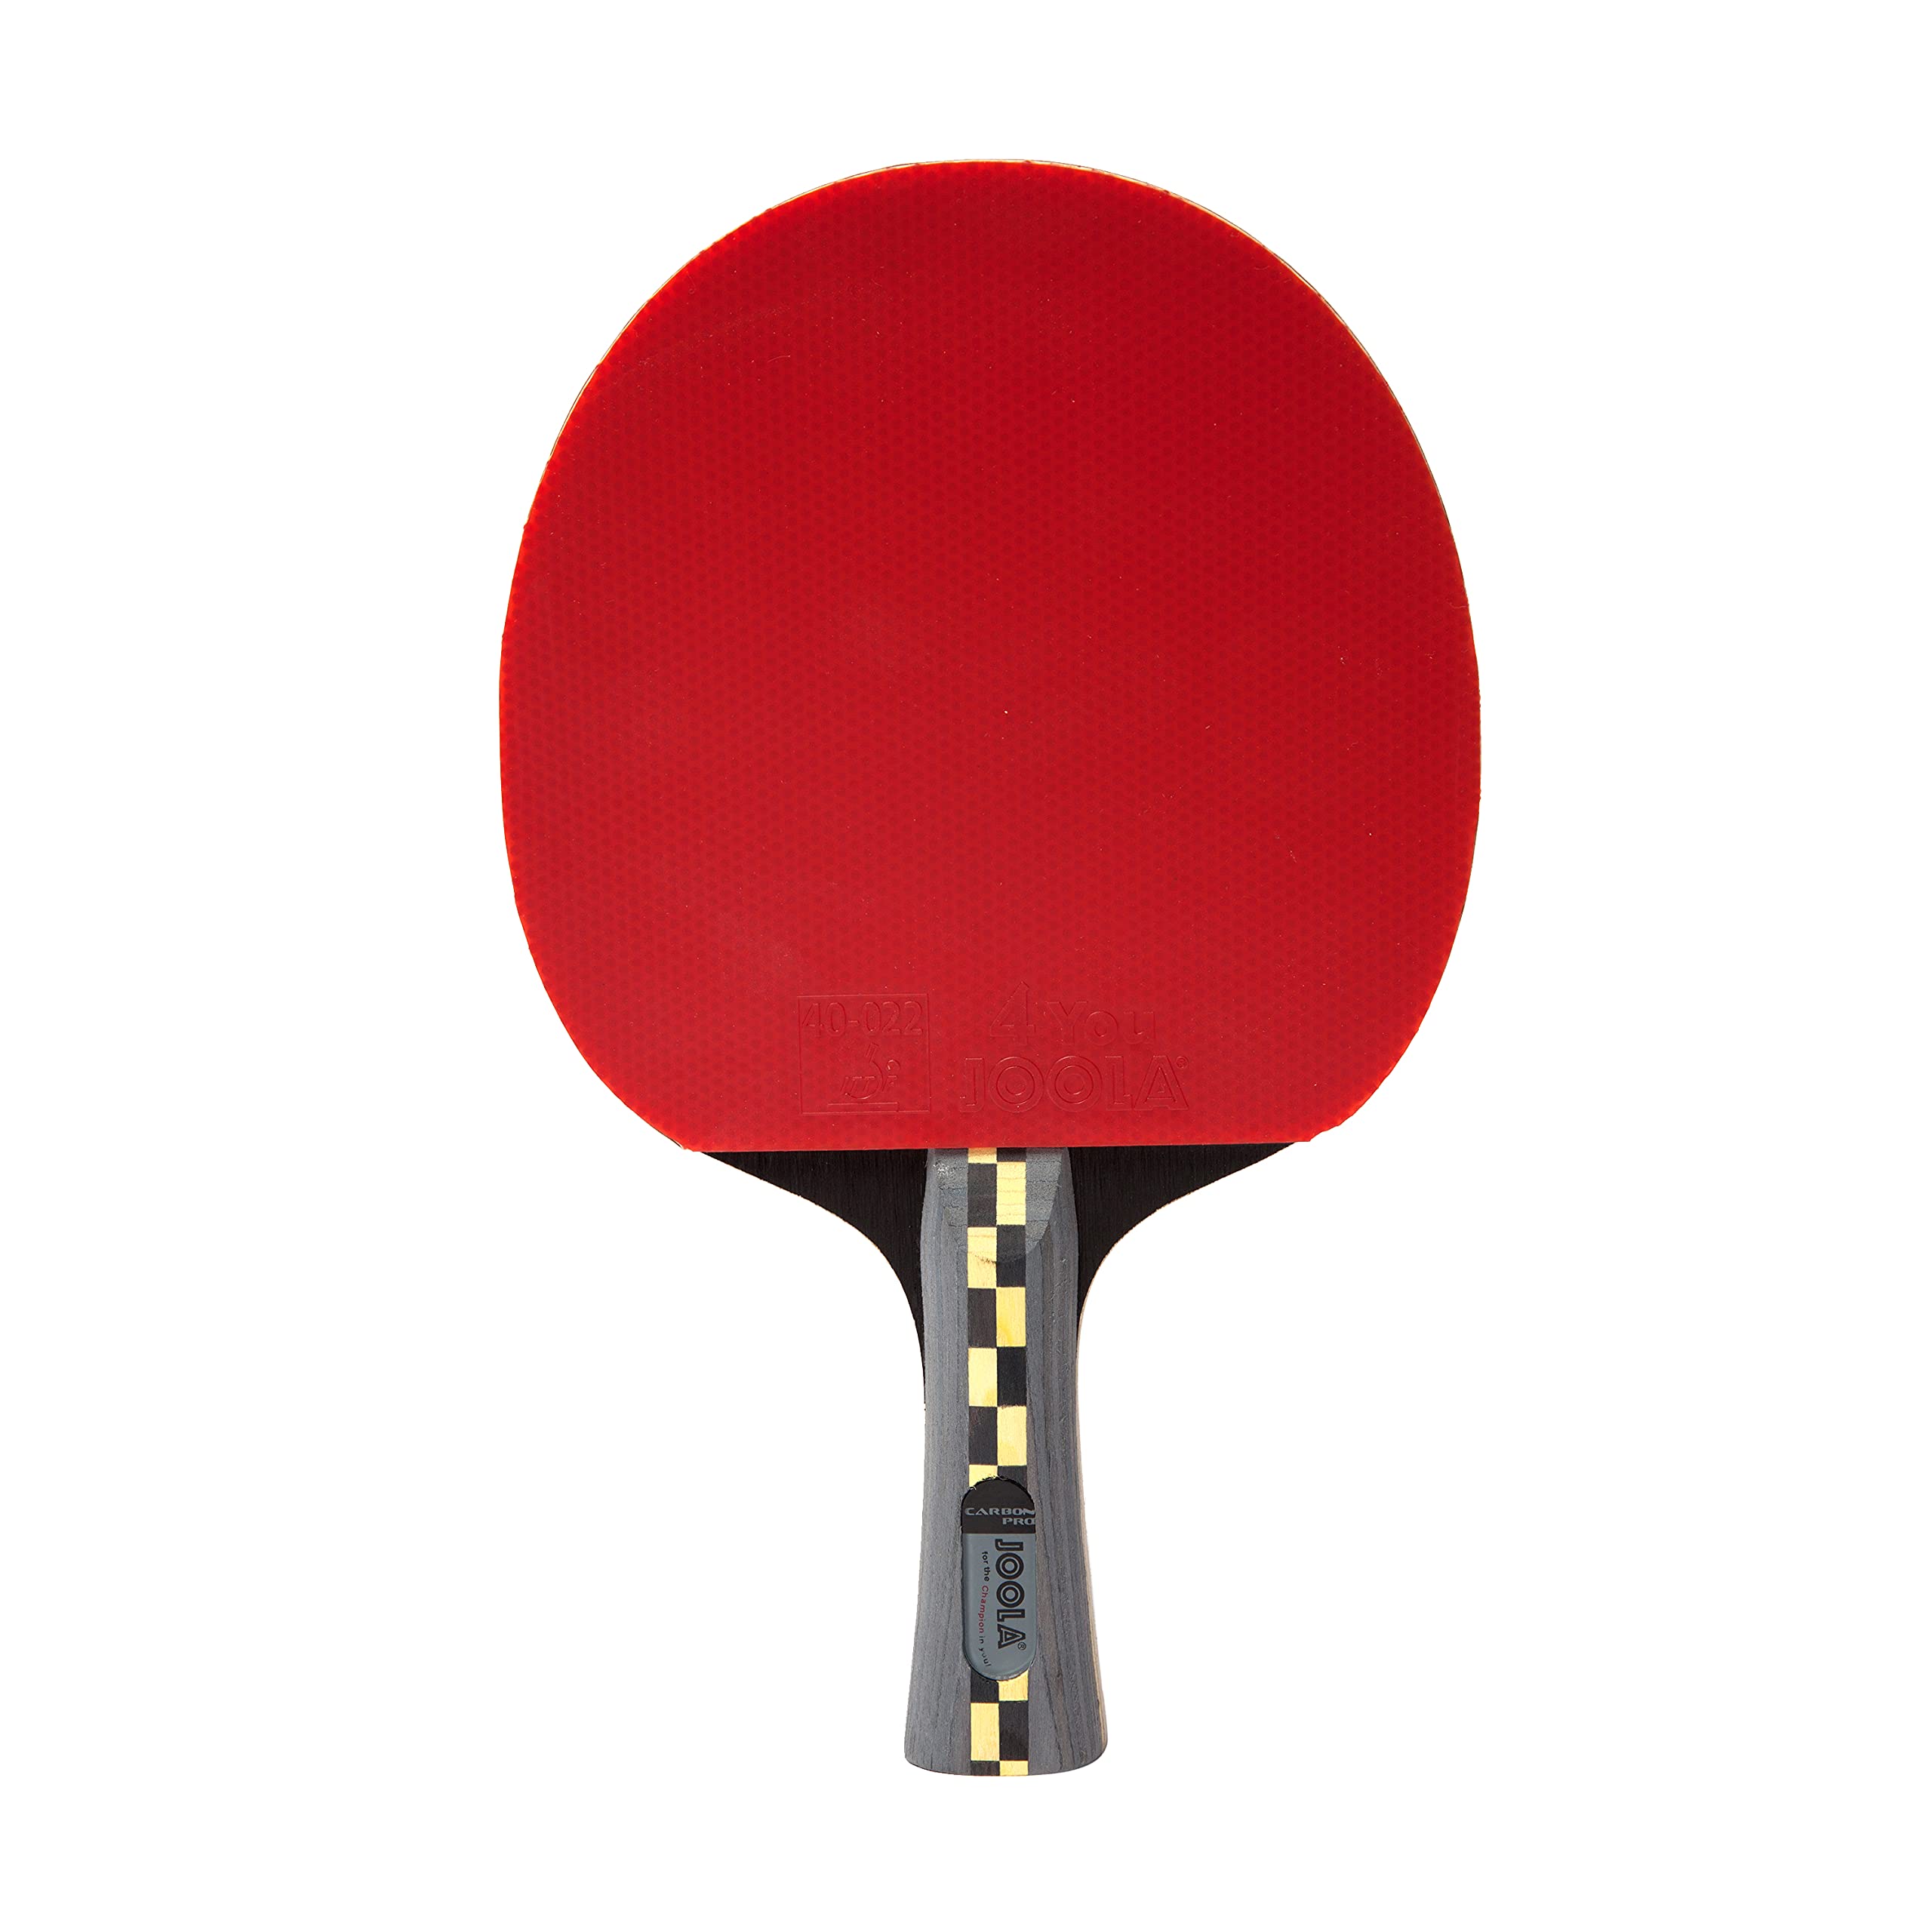 JOOLA Carbon Pro Professional Ping Pong Paddle - Racket with Carbonwood Technology & Red/Black JOOLA 4 You Rubber - Table Tennis